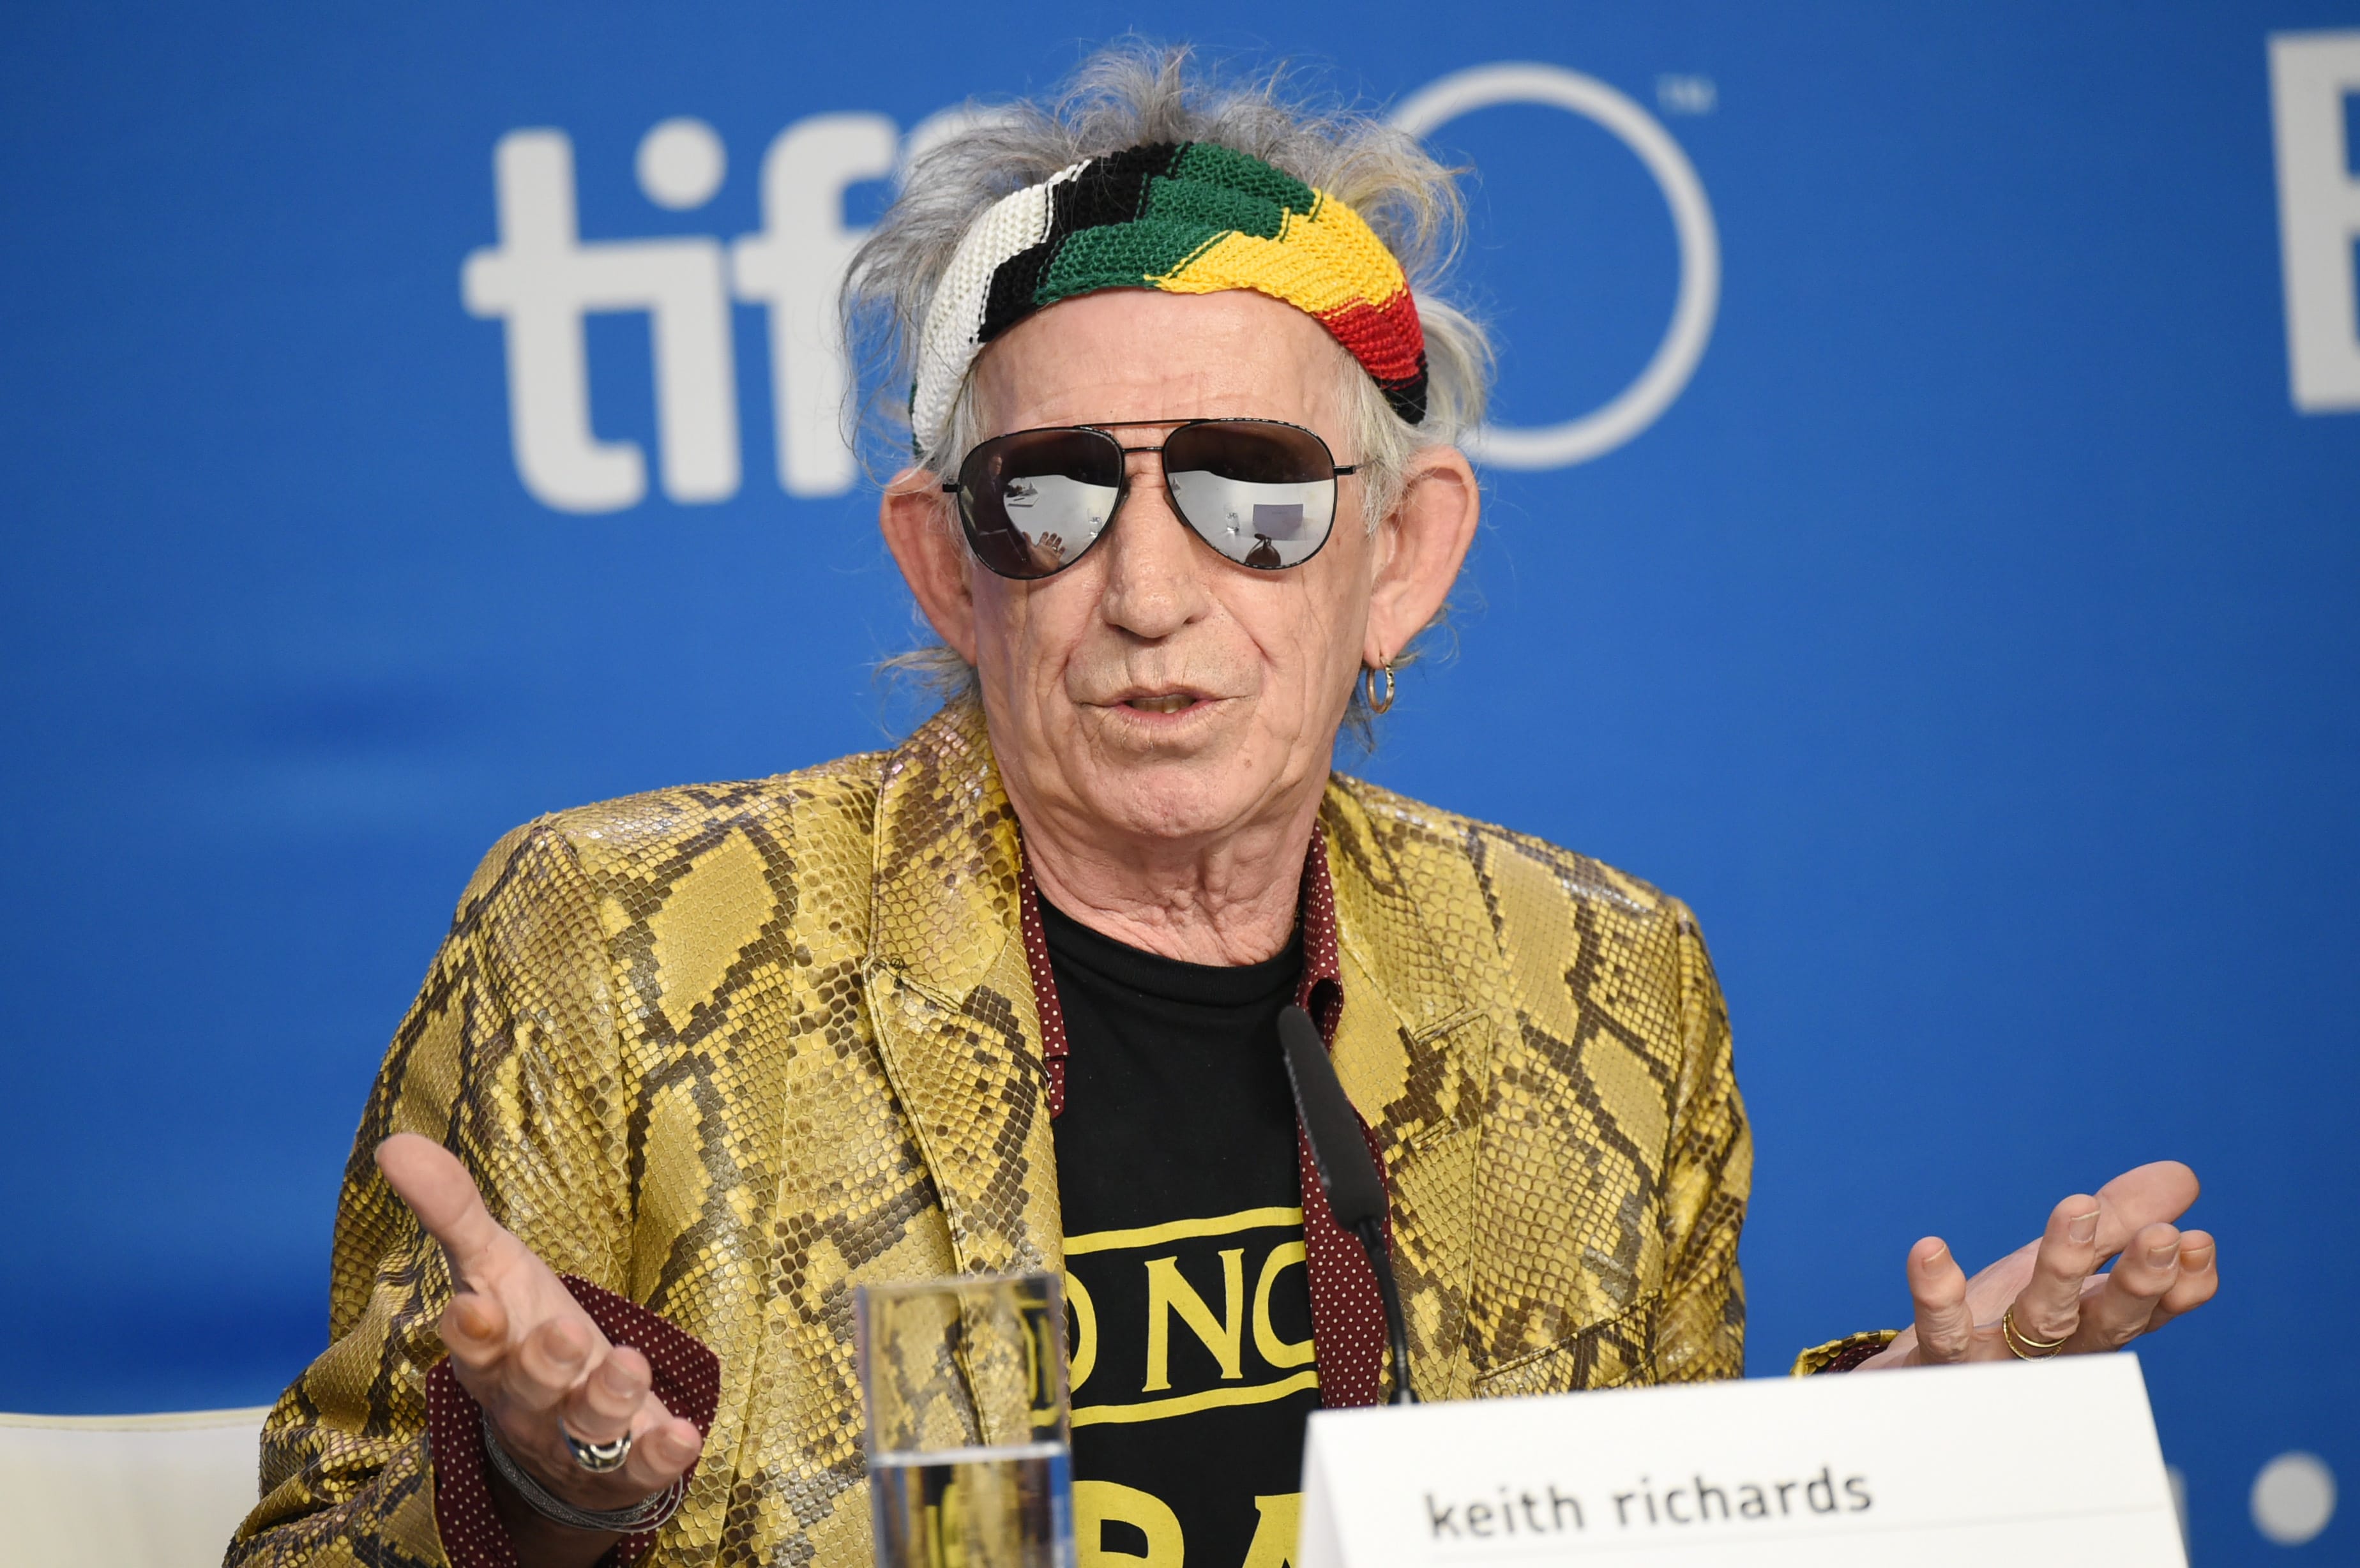 Keith Richards attends a press conference for "Keith Richards: Under the Influence" on day 8 of the Toronto International Film Festival at TIFF Bell Lightbox on Thursday  in Toronto.